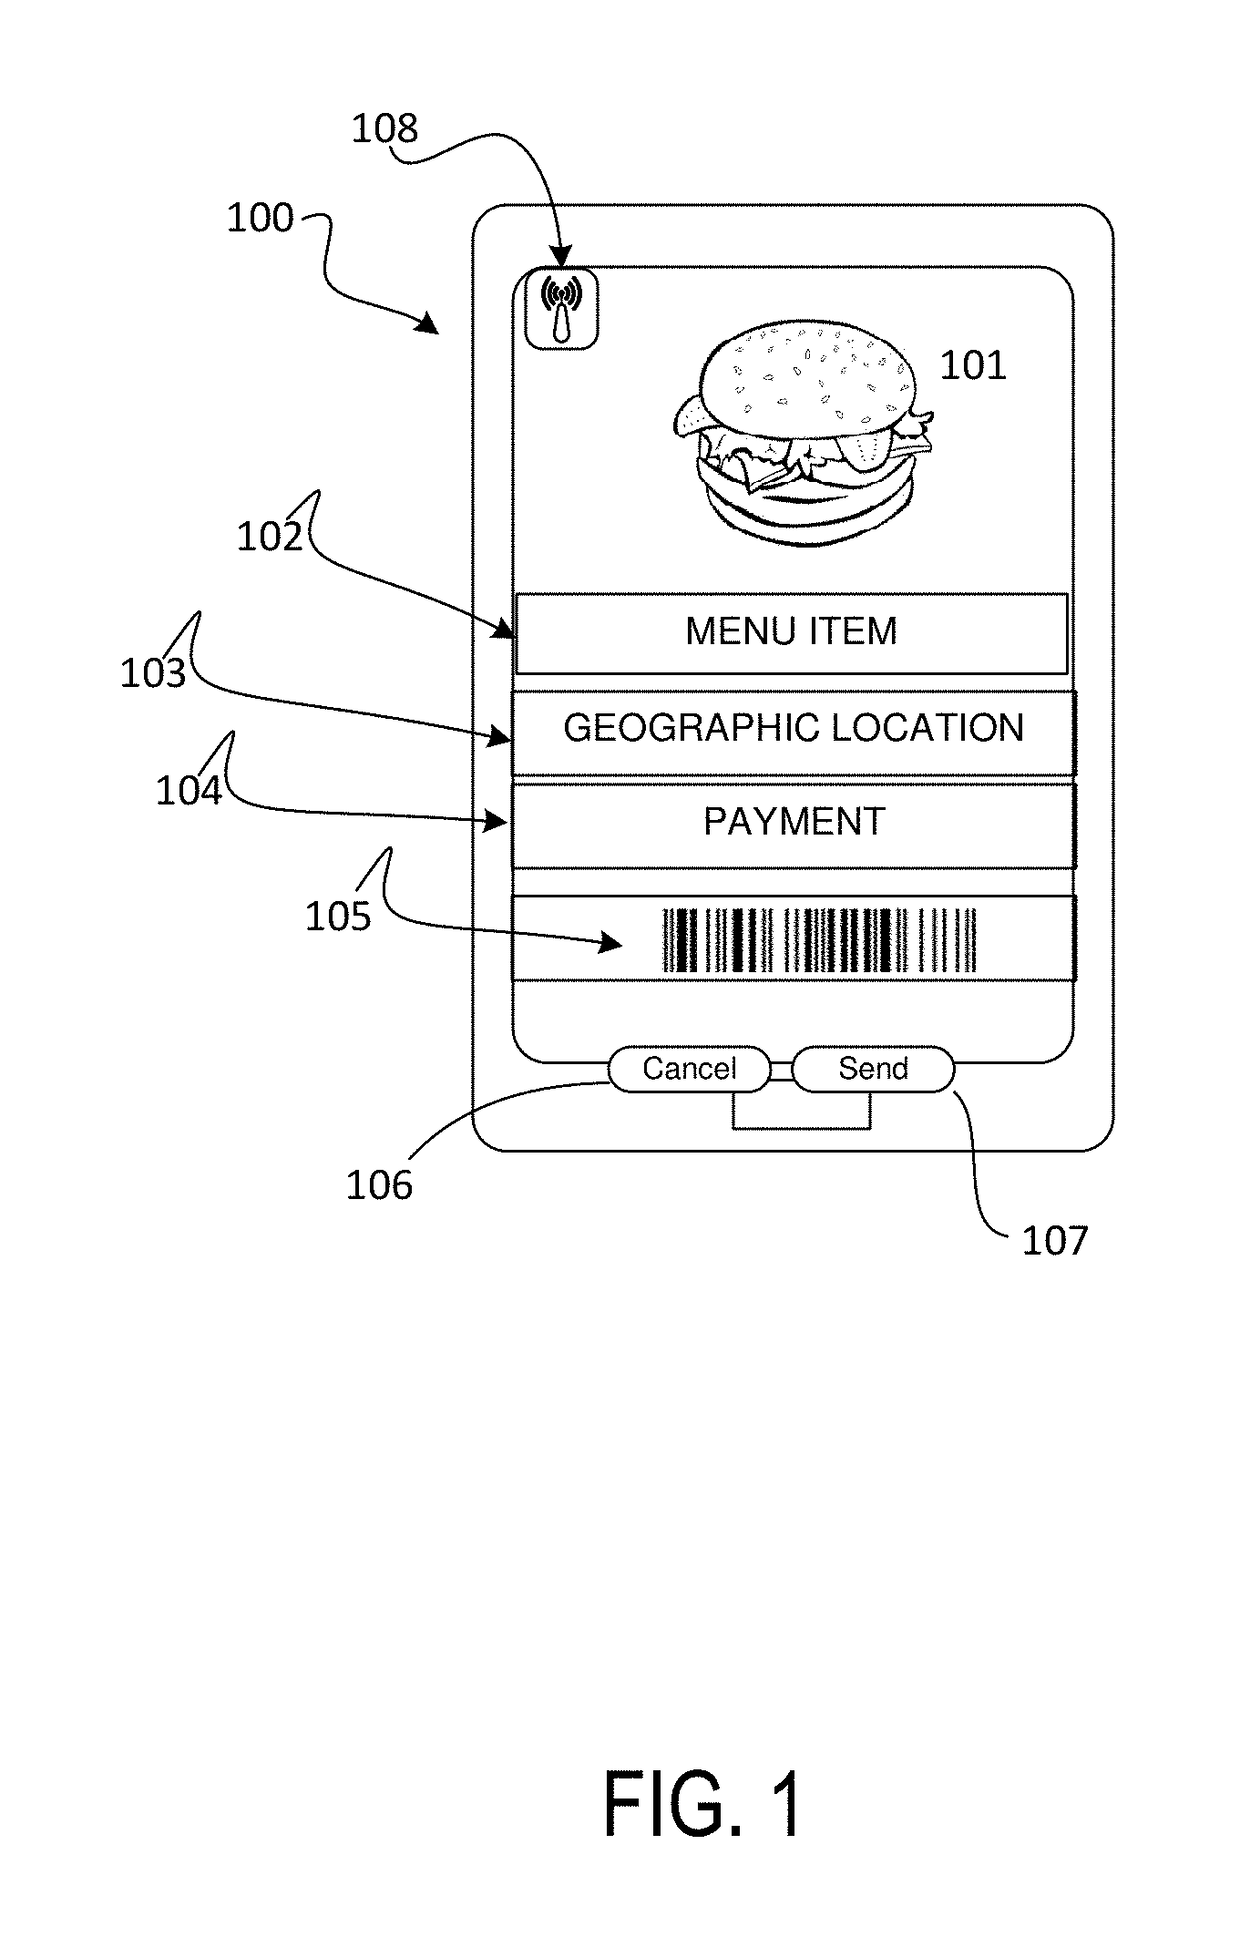 Drive-thru / point-of-sale automated transaction technologies and apparatus